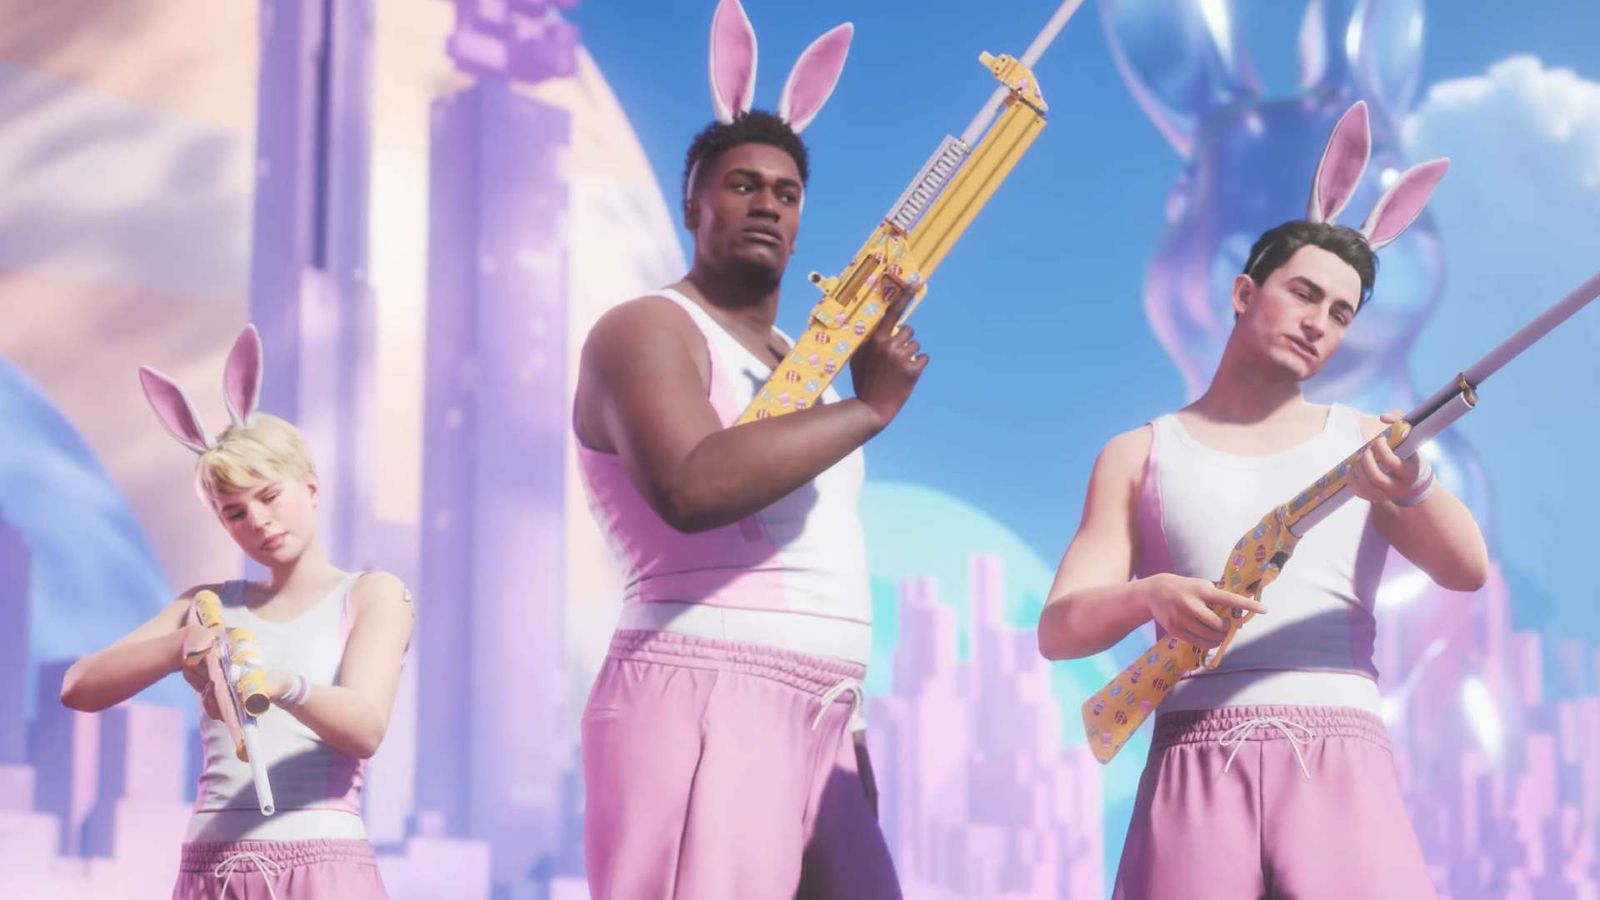 Three The Finals contestants in Easter Attire holding easter-themed weapons